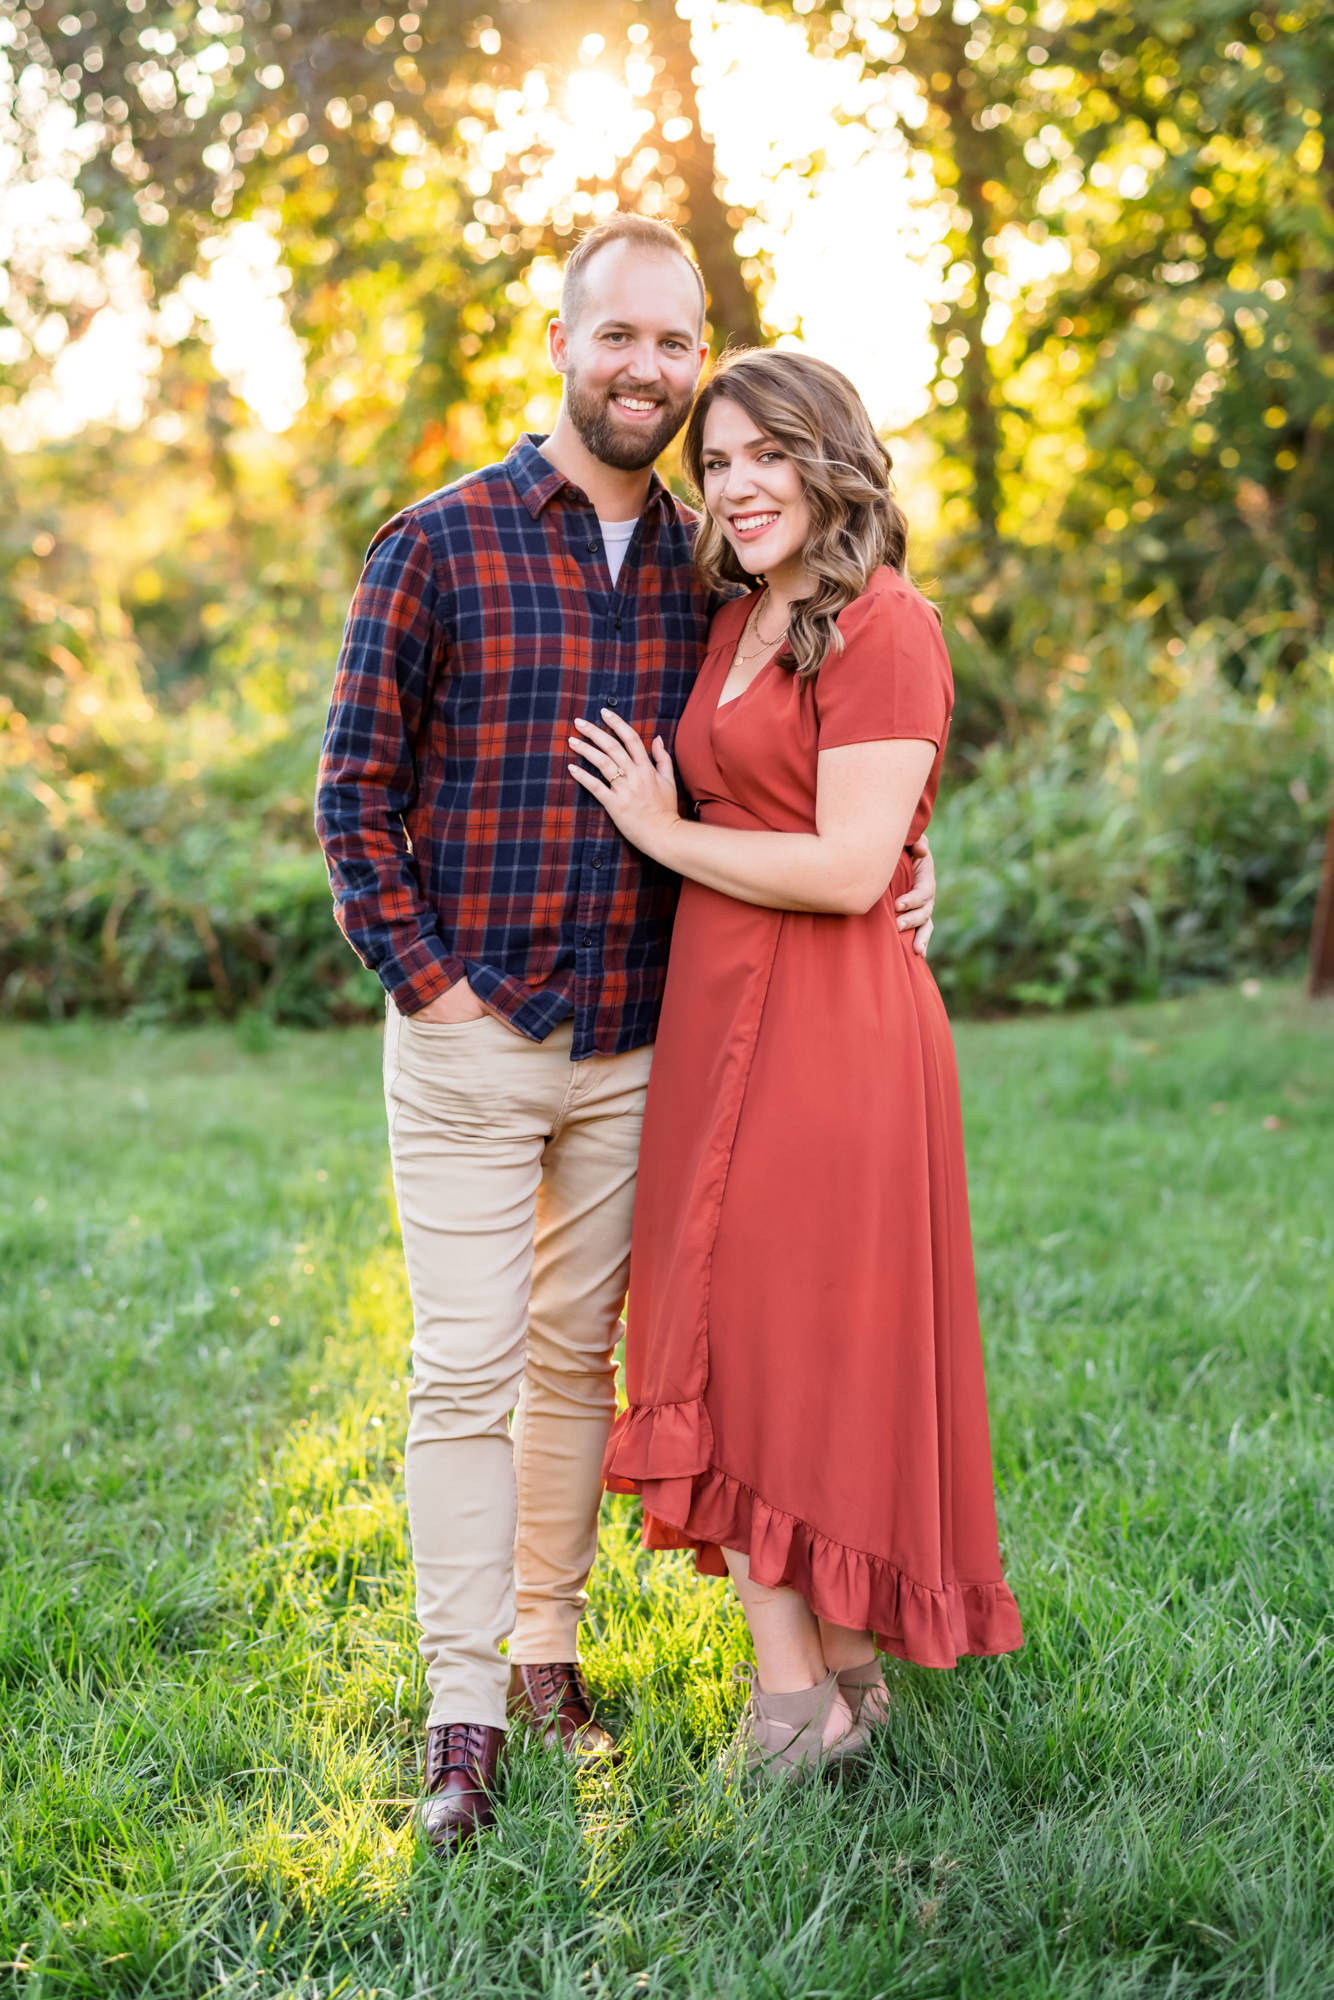 woman wearing rust orange dress with fiance wearing plaid shirt during outdoor engagements